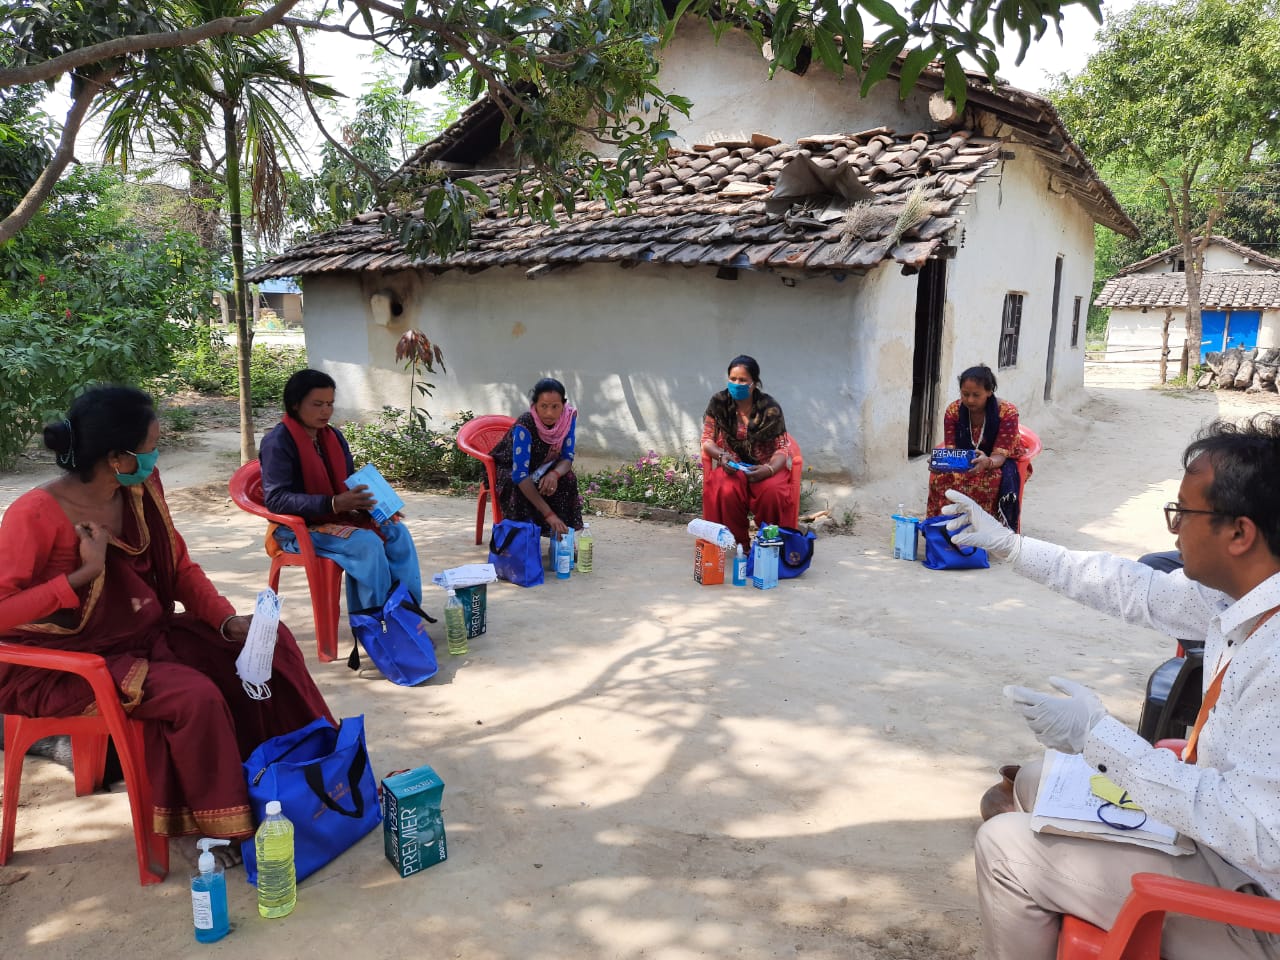 <p></noscript>CARE Nepal is committed in supporting vulnerable households in communities within our operations. As a part of the same, home quarantine kits were distributed to 46 most vulnerable households in Krishnapur Rural Municipality, Kanchanpur in coordination with the local level authorities.</p>” itemprop=”image” height=”960″ width=”1280″ title=”RS69165_Distribution_Photo_1_Kanchanpur” onerror=”this.style.display=’none'”><h2><strong>3. Empower local women leaders</strong></h2><p>Women are and will be the front line leaders in this fight. Why? Because in communities around the world, women are the glue. They care for their children and often their ageing family members, they manage the household, support each other, and their farming or businesses ensure their family are able to eat. We have learned to put women at the centre of creating change, and it’s so important that we continue to do so as we take on this challenge.</p><p>In Sri Lanka, women business owners are coming together to devote their time and resources to prevent the spread of coronavirus. An owner of a baby’s clothing store coordinated an effort with other women entrepreneurs to produce reusable face masks for the government to deliver free of charge to people in remote areas. These women are not only helping to combat the virus, but also keep their staff—many of them women—working.</p><h2><strong>4. Fight misinformation</strong></h2><p>The Ebola and Zika battles taught us that community trust can make the difference between life and death. Social media can be an important route to information and how-to videos; it can also be a source of misinformation and dangerous theories. CARE and our partners are mobilizing community volunteers in places like Nigeria, Haiti, and Nepal to go door-to-door with important facts and guidance to help prevent, respond to, and diminish outbreaks. We’re also translating World Health Organization (WHO) guidance into local languages—and supplementing written materials with radio and social media posts.</p><h2><strong>5. Lend a hand, raise your voice</strong></h2><p>Preventing the impending tidal wave of COVID-19 will take all of us working together. It will take everyone following guidelines for their own health and safety to stop the spread. It will take our collective voices to push for prevention and response in development and humanitarian settings. And it will take financial support from individuals, foundations, and corporations—many of whom are already answering the call. CARE and many other organizations are working with trusted partners on the ground to assess what is needed at the country and community level, and tailoring programs to those needs.</p><p>We are all part of one global community and when we come together, we have the most powerful impact. Together we can act now, protect each other and save lives.</p><h3> <a href=